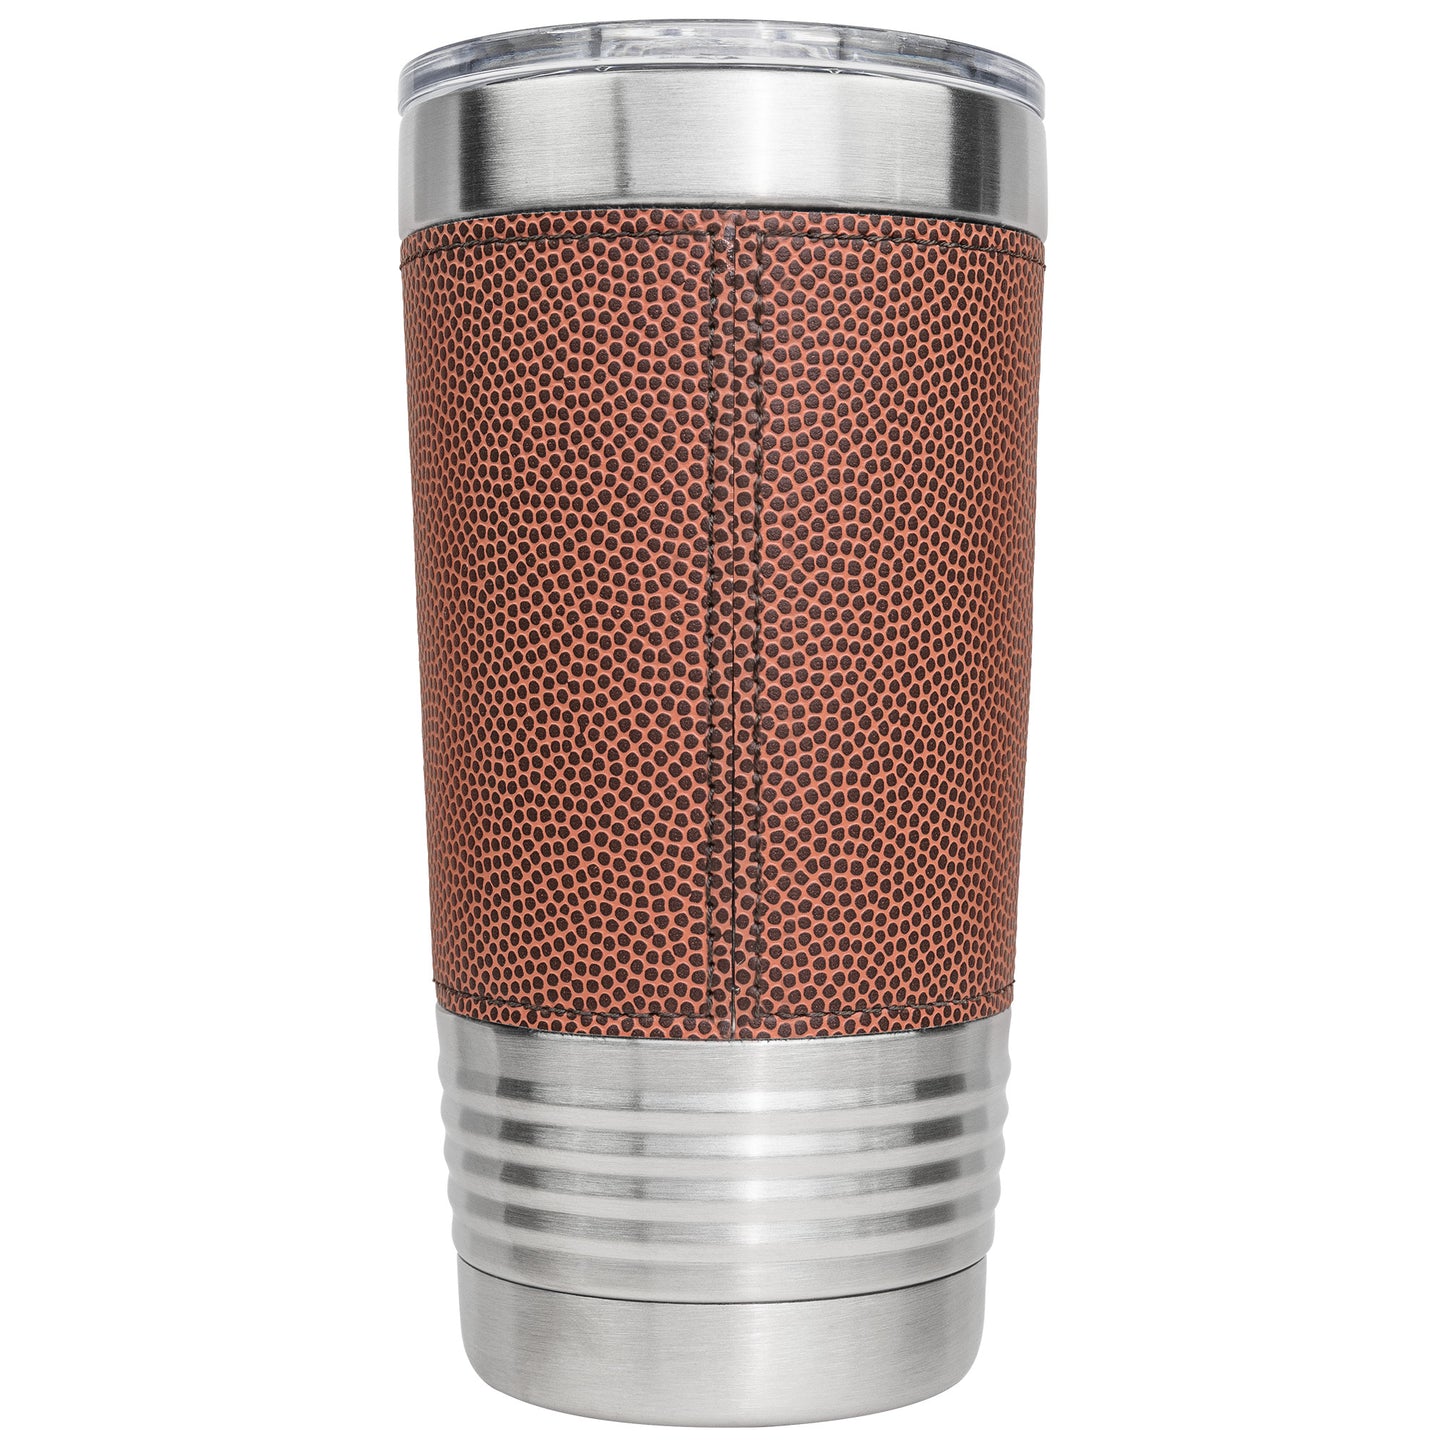 Personalized Football Coach 20 oz Engraved Stainless Steel Tumbler